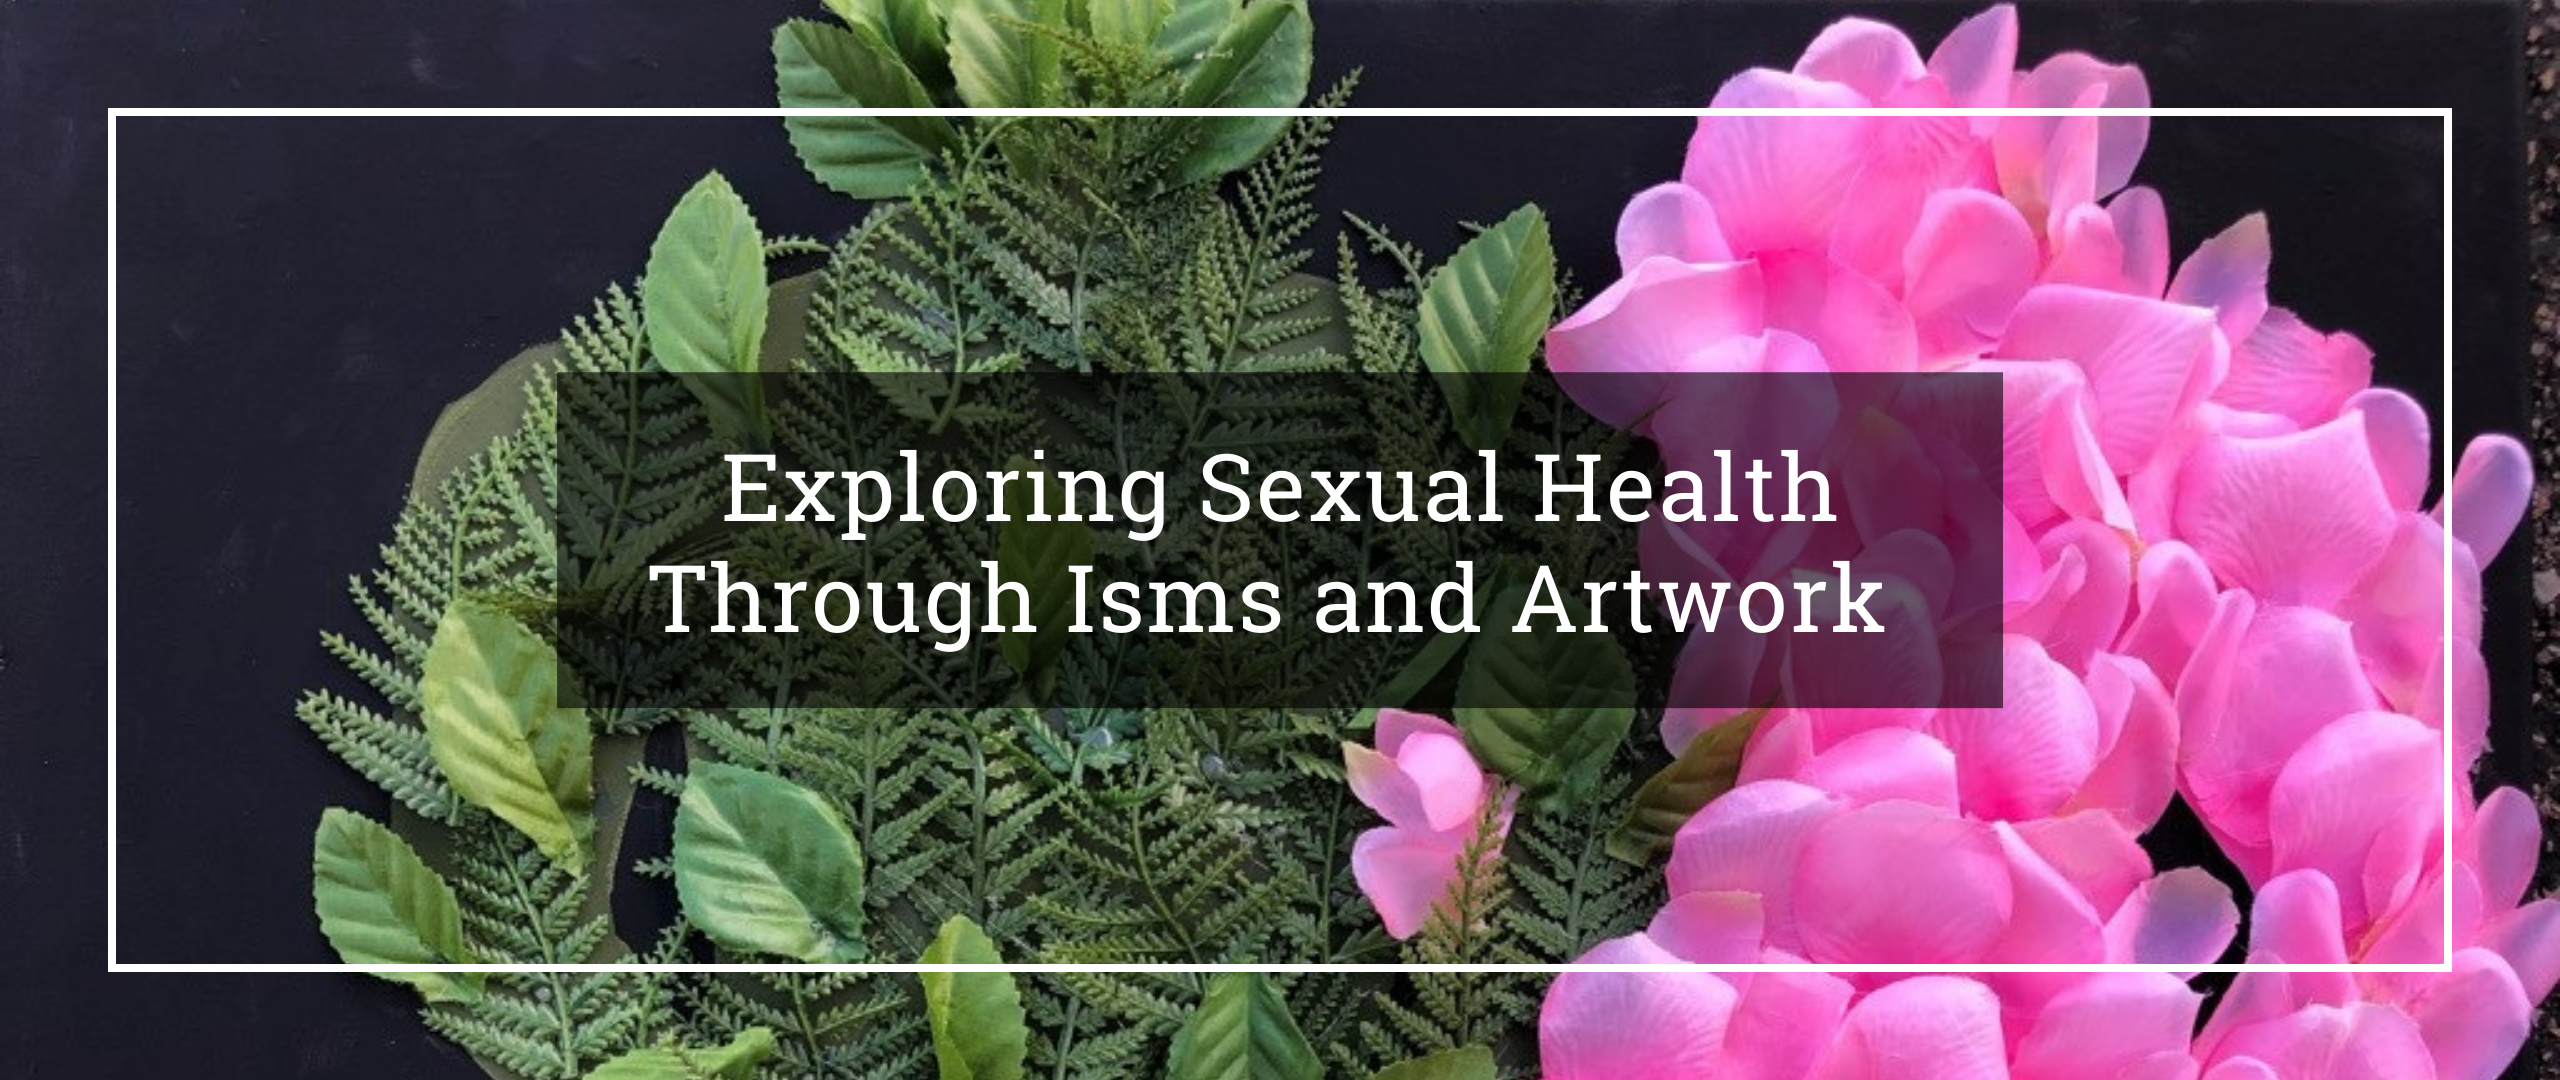 Exploring Sexual Health through Isms and Artwork